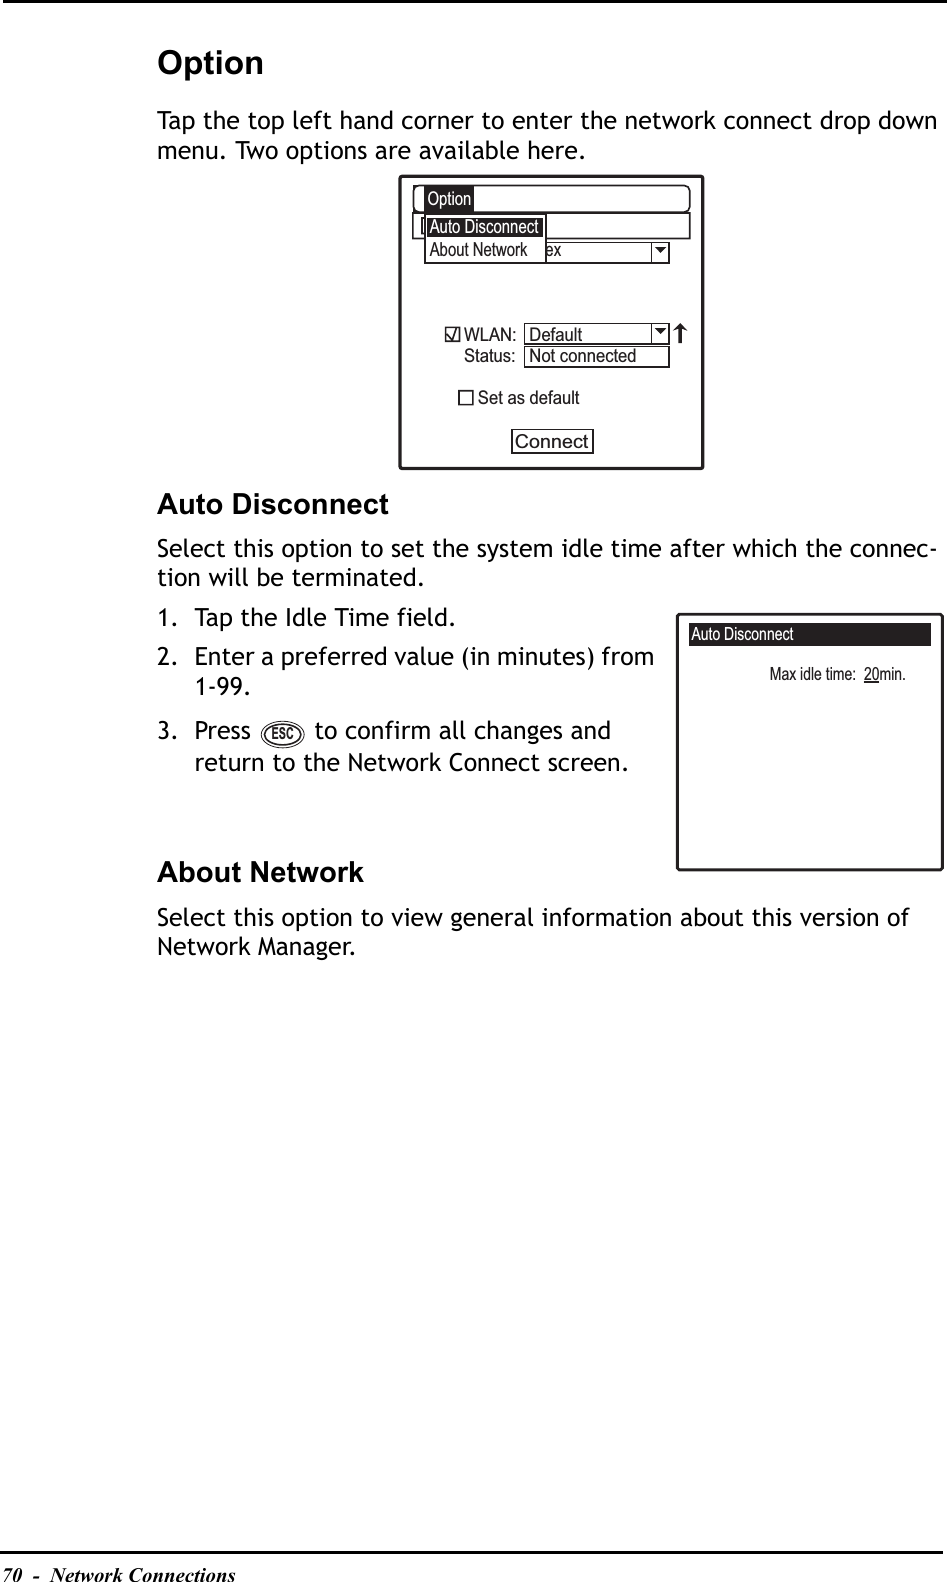 70  -  Network ConnectionsOptionTap the top left hand corner to enter the network connect drop down menu. Two options are available here.Auto DisconnectSelect this option to set the system idle time after which the connec-tion will be terminated.1. Tap the Idle Time field.2. Enter a preferred value (in minutes) from 1-99.3. Press   to confirm all changes and return to the Network Connect screen.About NetworkSelect this option to view general information about this version of Network Manager.Auto DisconnectAbout Network exWLAN:Status:   Set as defaultConnectA:\OptionDefaultNot connectedAuto DisconnectMax idle time:  20min.ESC